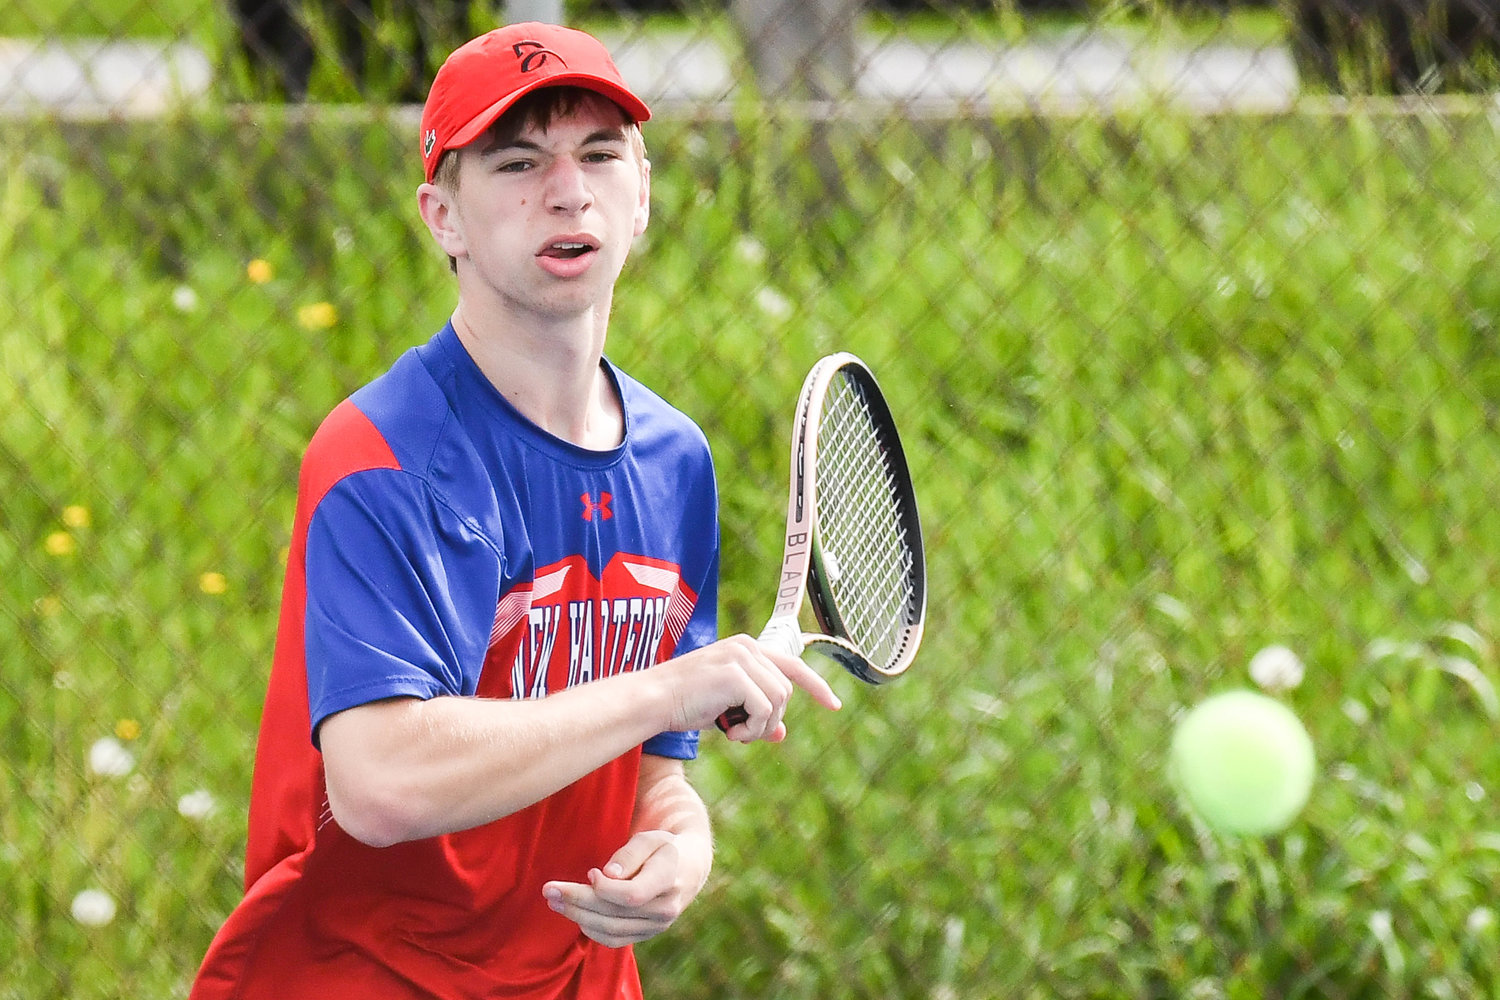 New Hartford’s David Fenner competes in the Section III Class B postseason in first singles at the Parkway Center tennis courts in Utica, which he won. Fenner has earned a spot at states for his performances at the Section III state qualifier this week at the Parkway. He was playing Thursday in the finals of the qualifier though results were not available at press time.